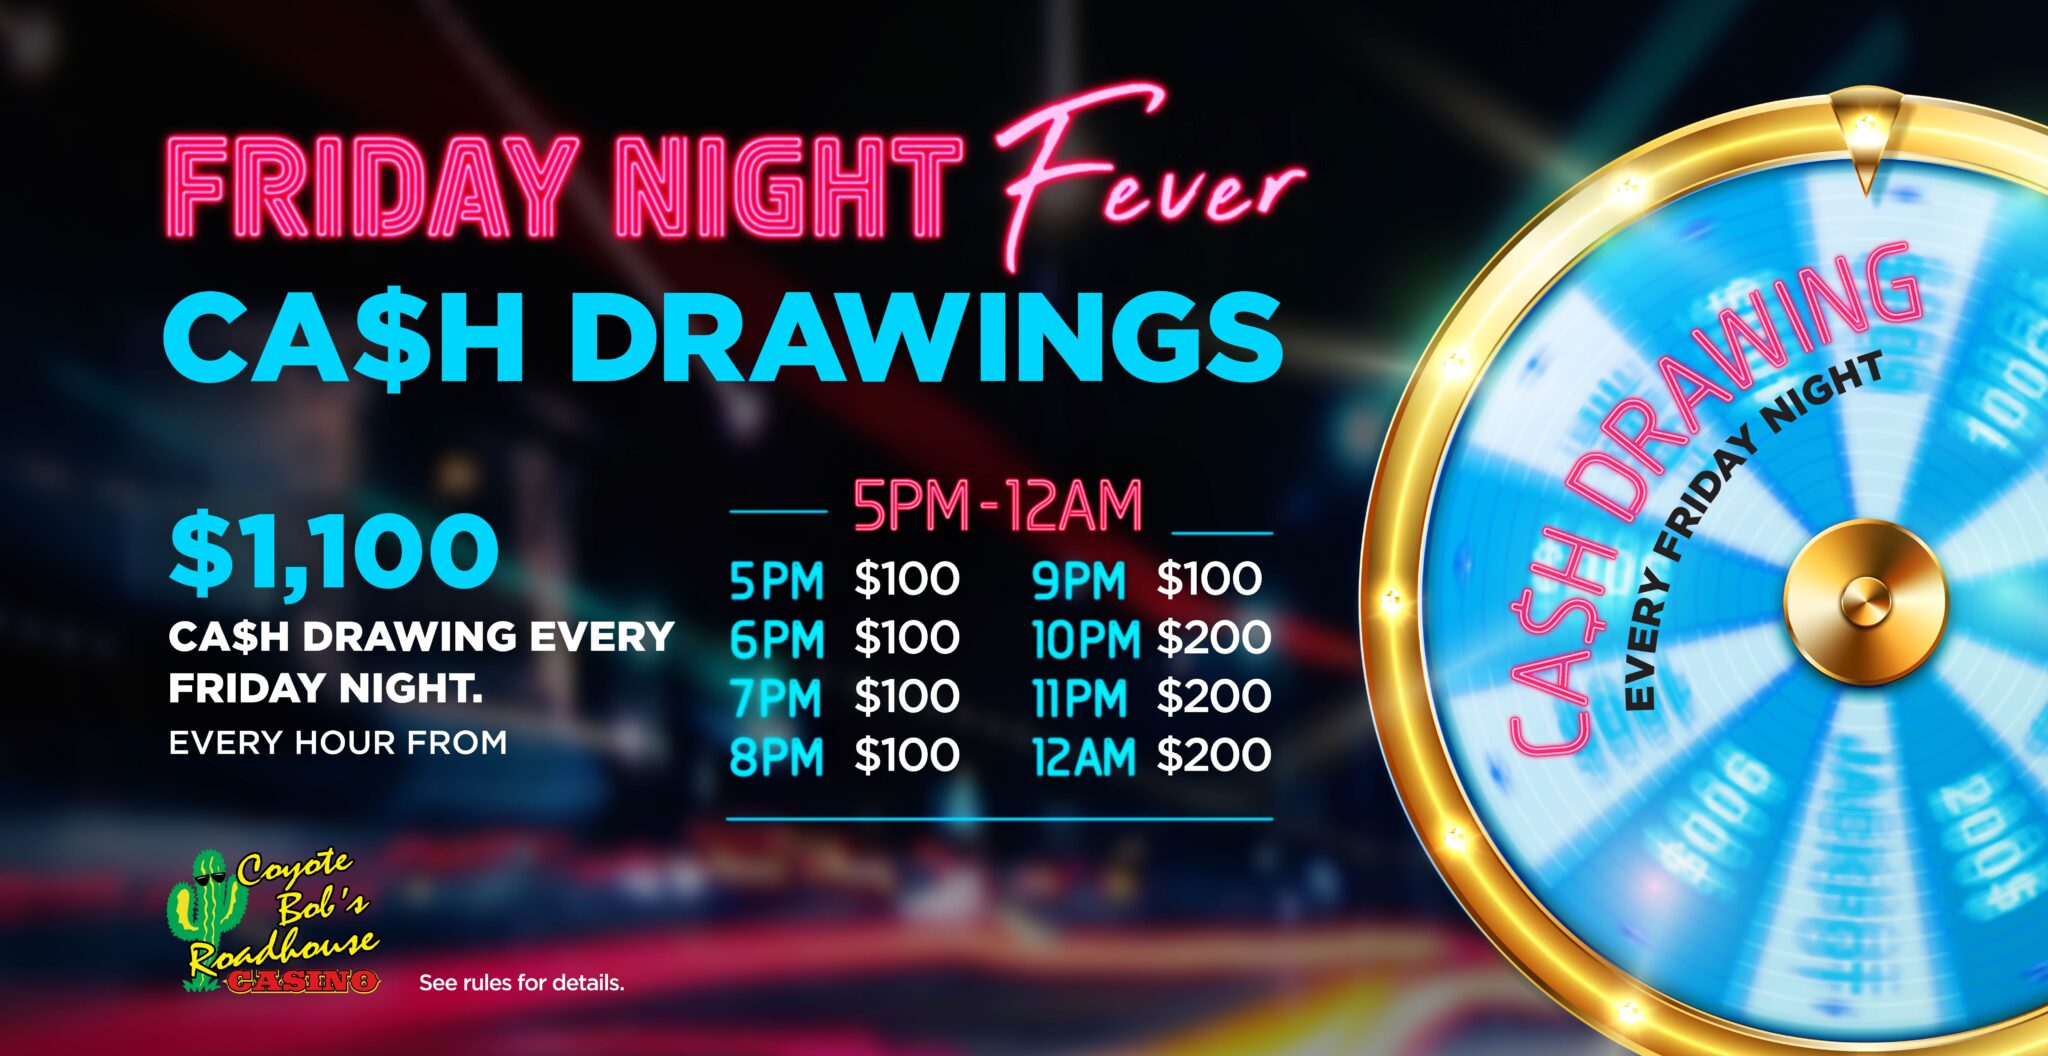 Coyote Bob's Roadhouse Casino Kennewick | Friday Night Fever Cash Drawings